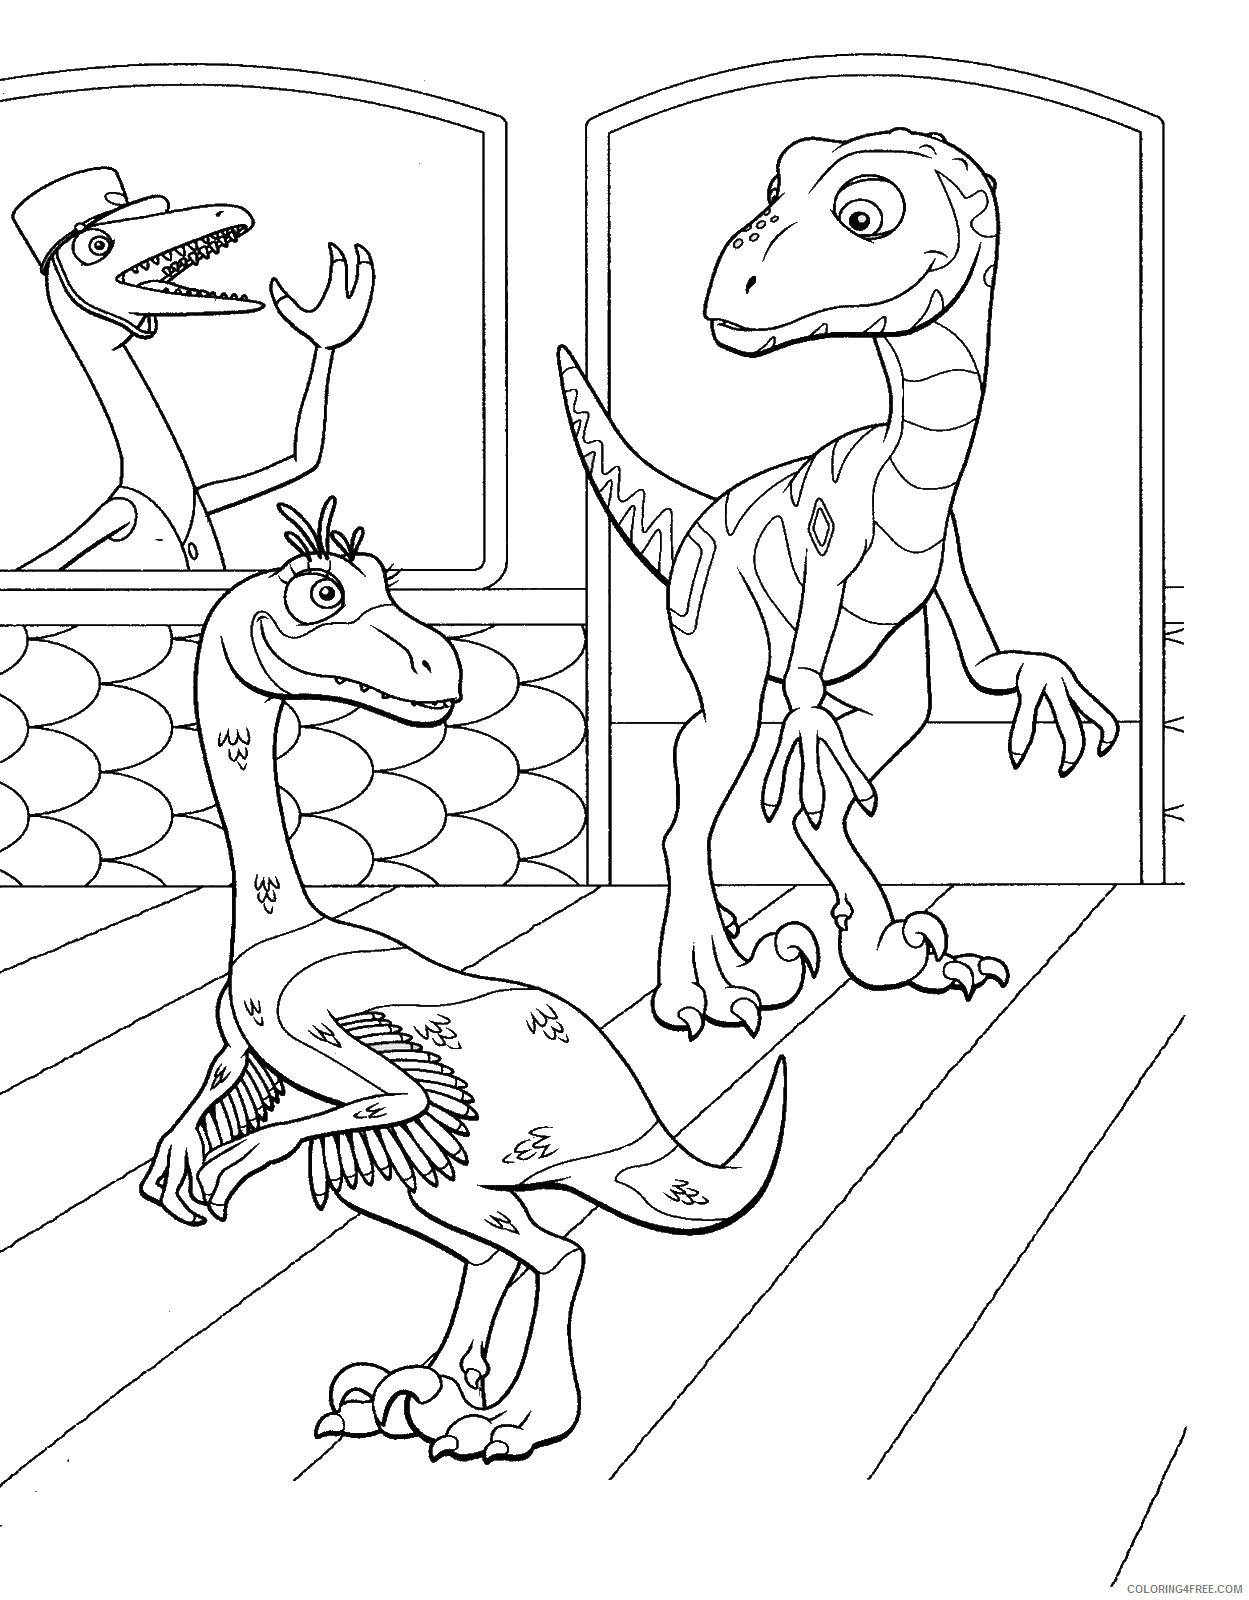 Dinosaur Train Coloring Pages Cartoons dino_train_cl_32 Printable 2020 2253 Coloring4free